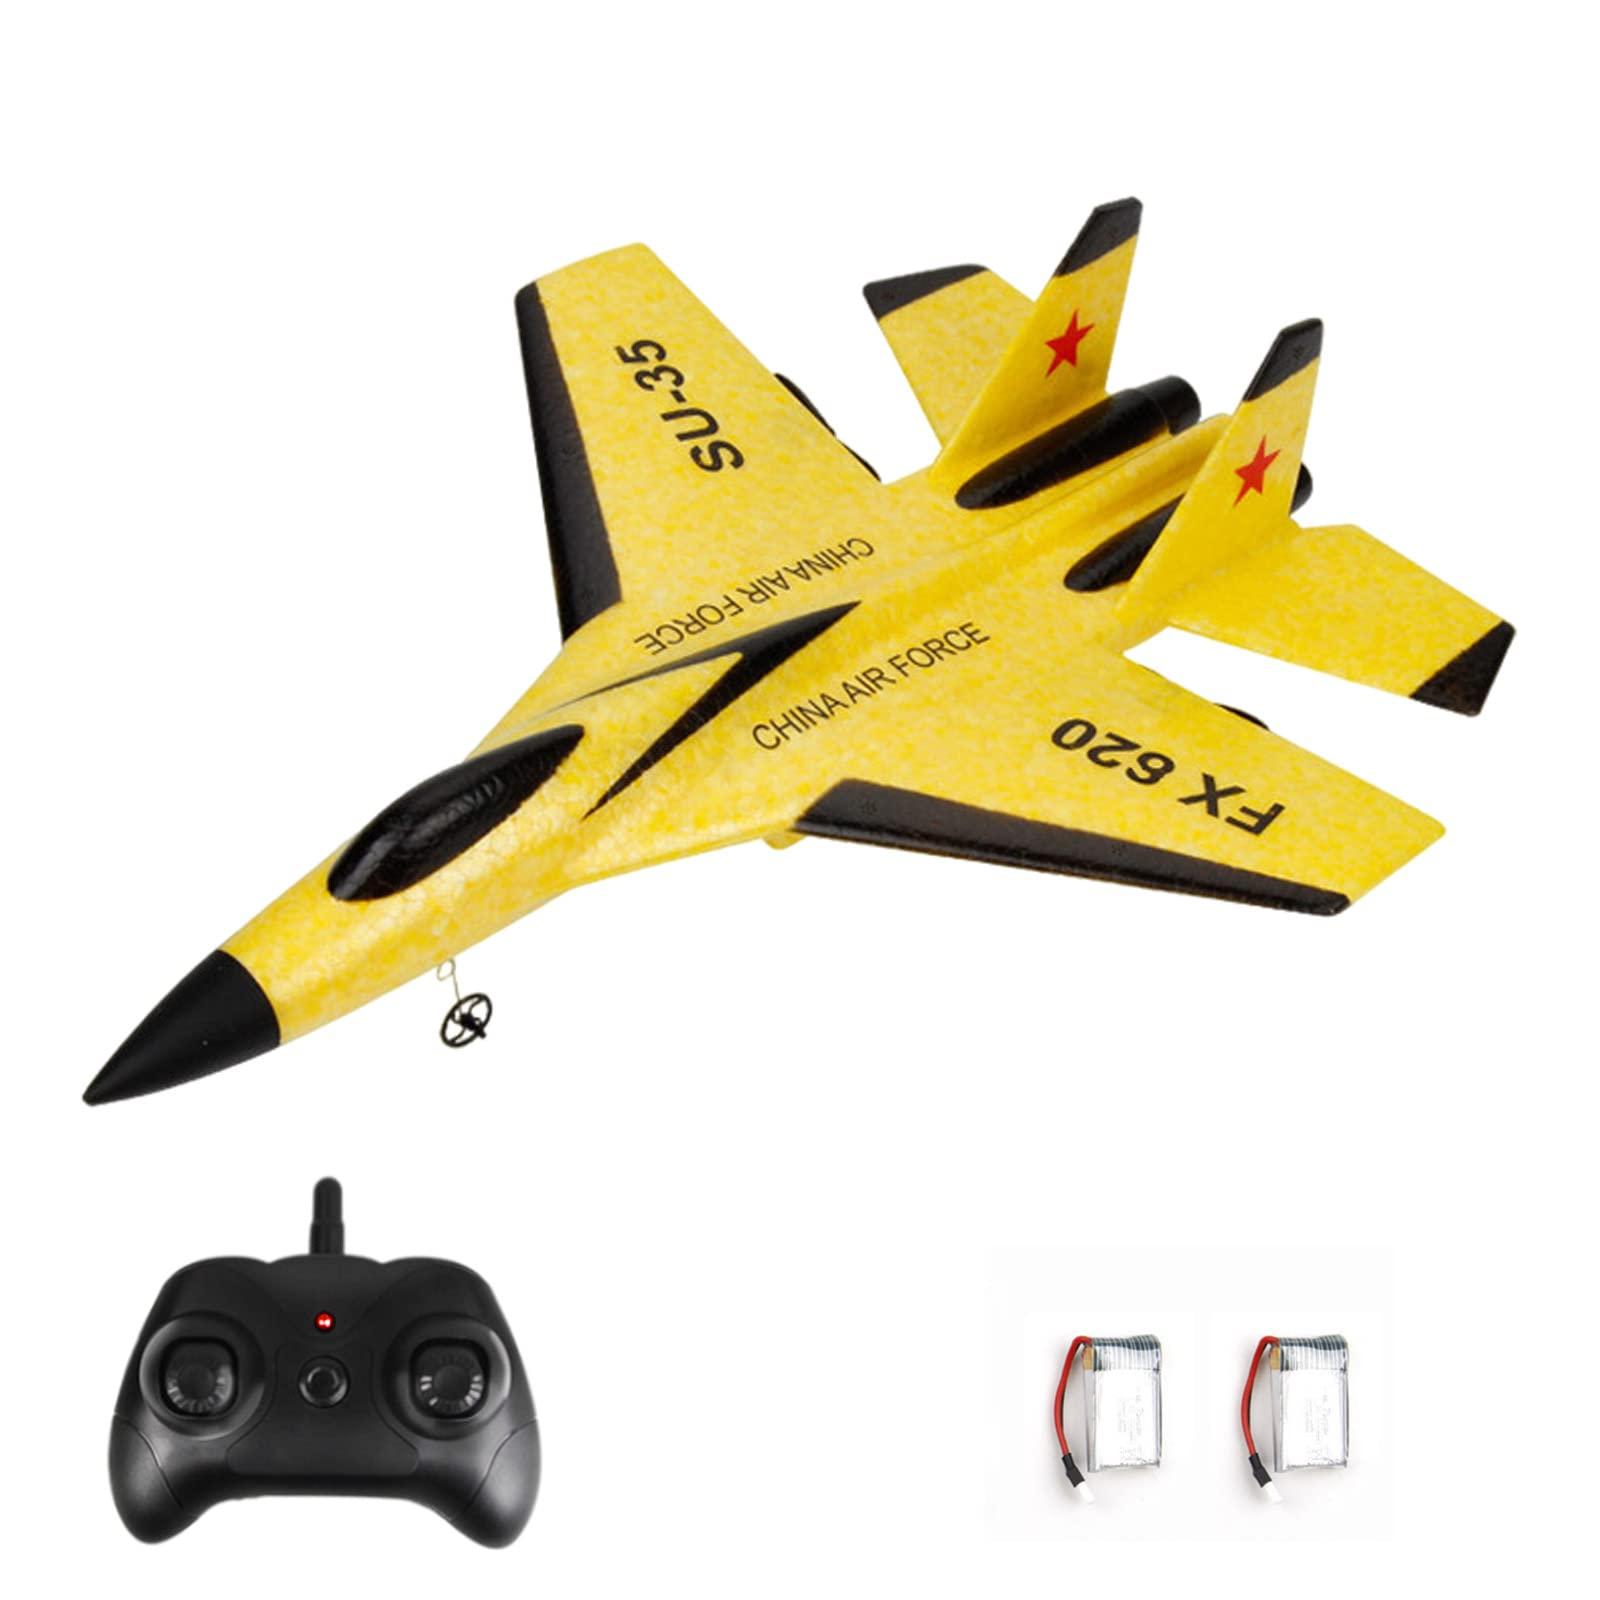 Remote Control Plane Amazon:  Types of remote control planes available on Amazon